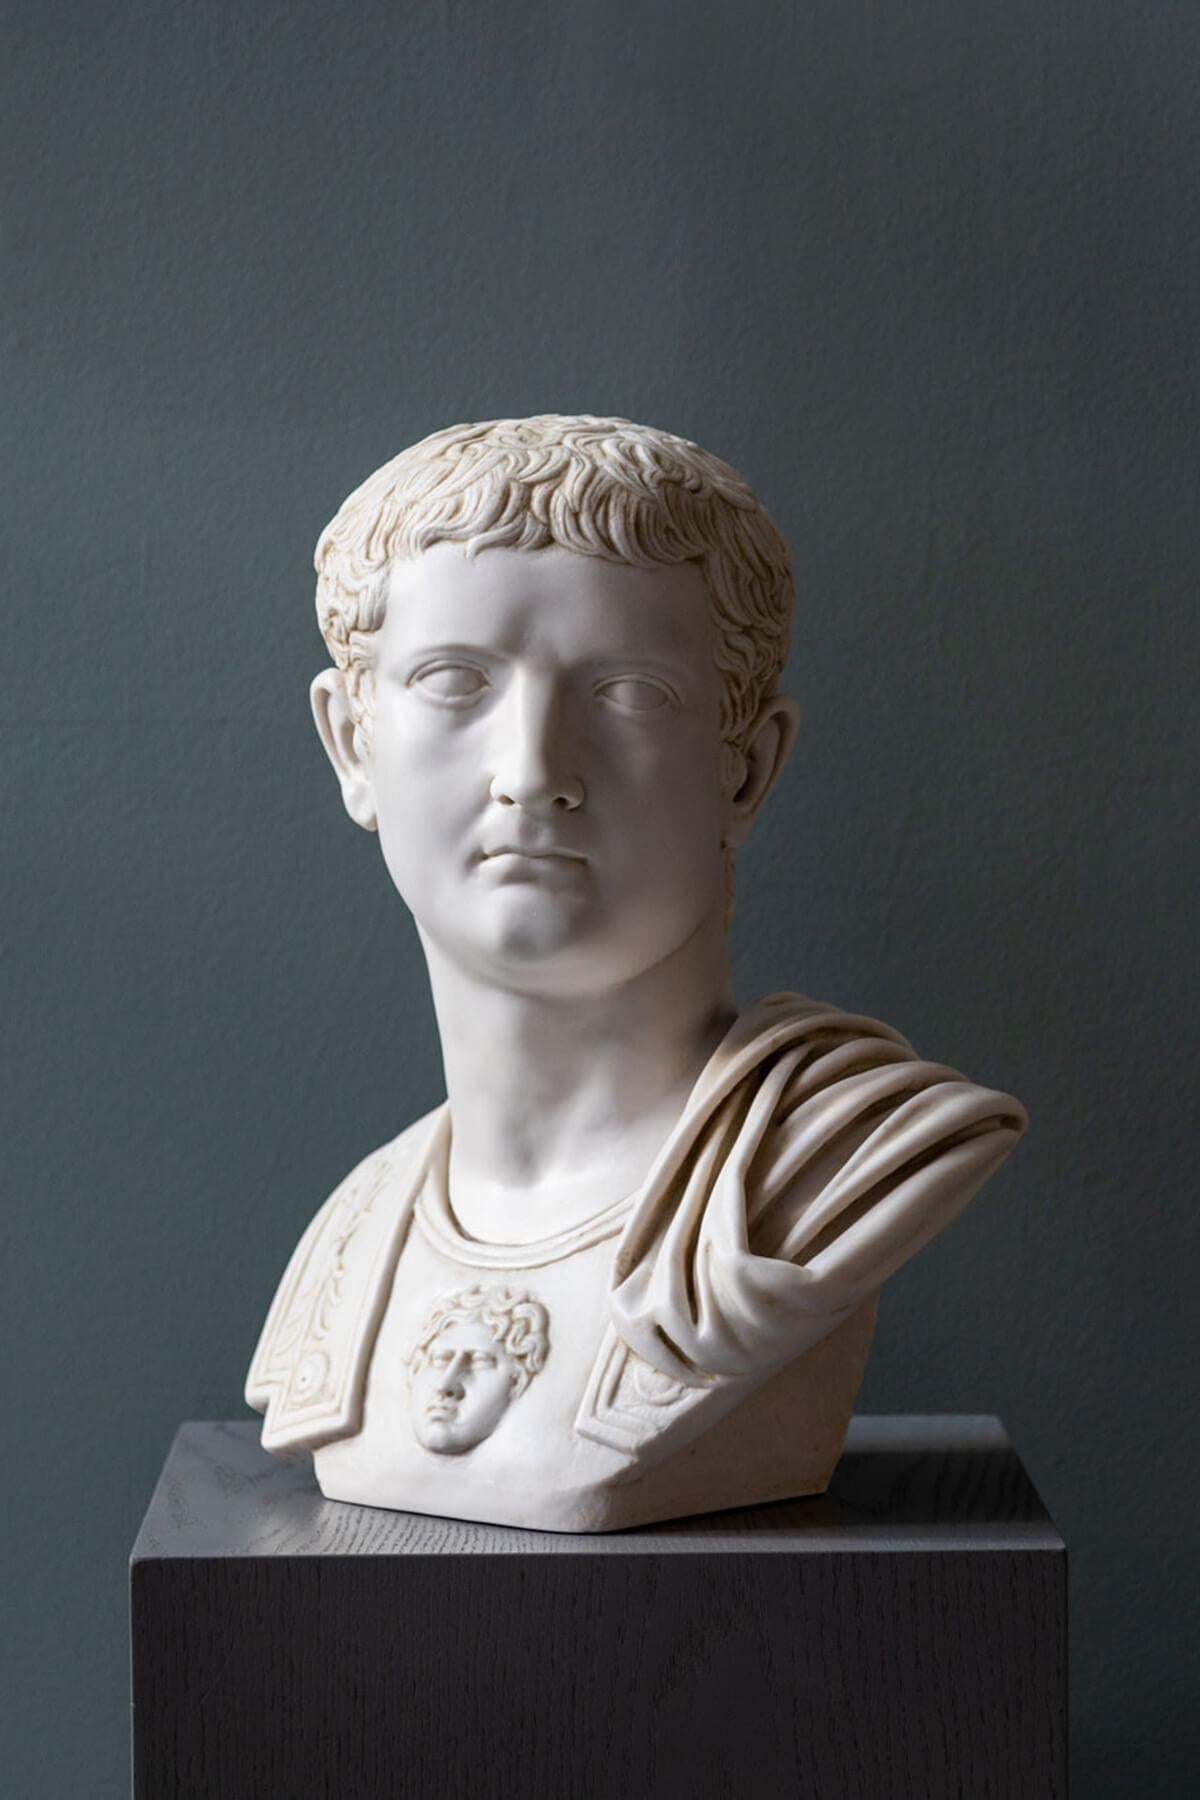 Lagu's selection of sculptures, including the Tiberius bust, is a great way to bring a piece of history into your living space. The Tiberius bust is based on the original sculpture displayed in the Ephesus Museum, which adds a sense of authenticity